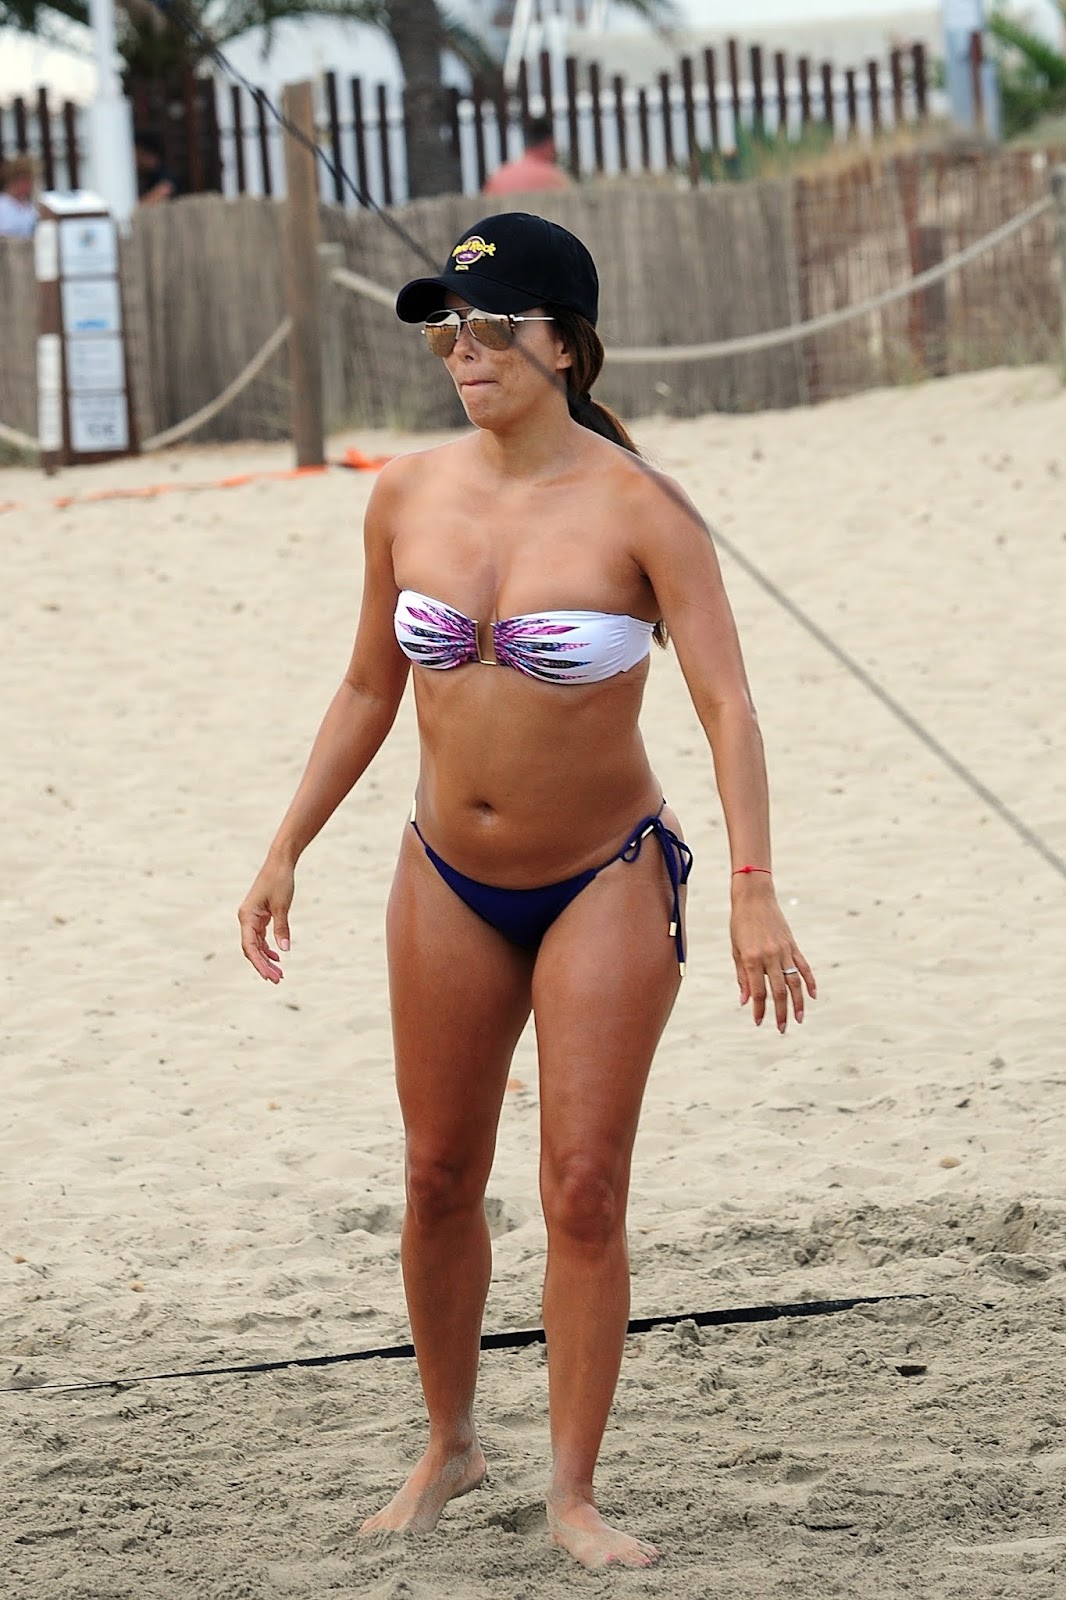 Eva Longoria flaunts her athletic figure in a bandeau bikini during a game of beach volleyball in Ibiza.